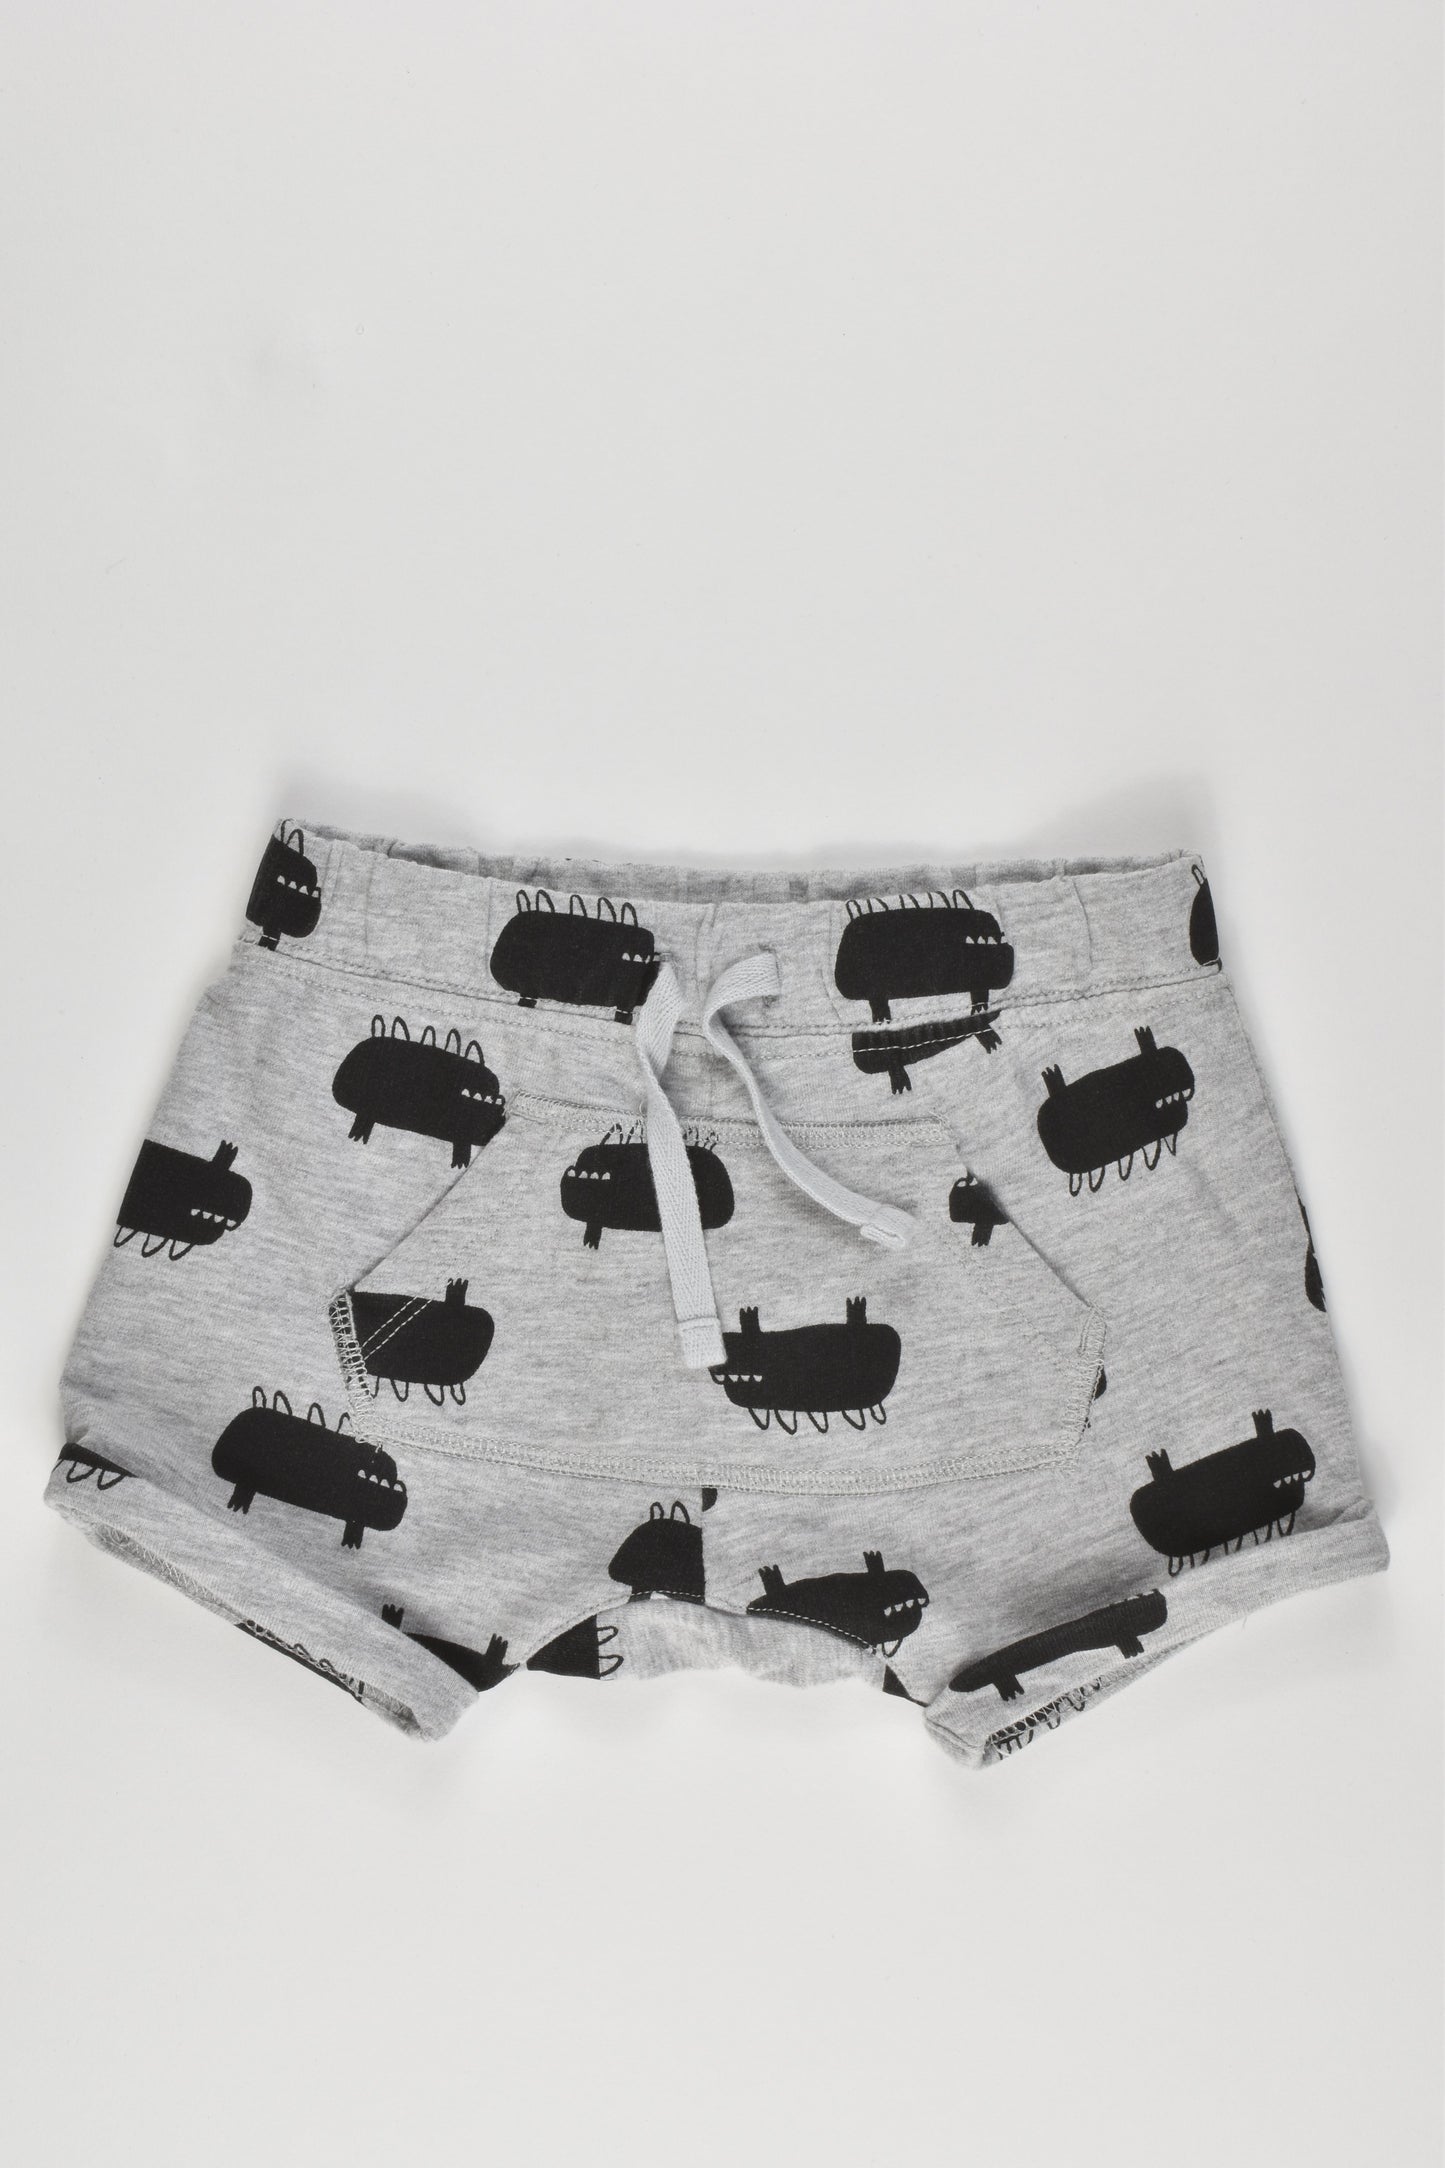 NEW Tiny Little Wonders Size 00 (3-6 months) Shorts